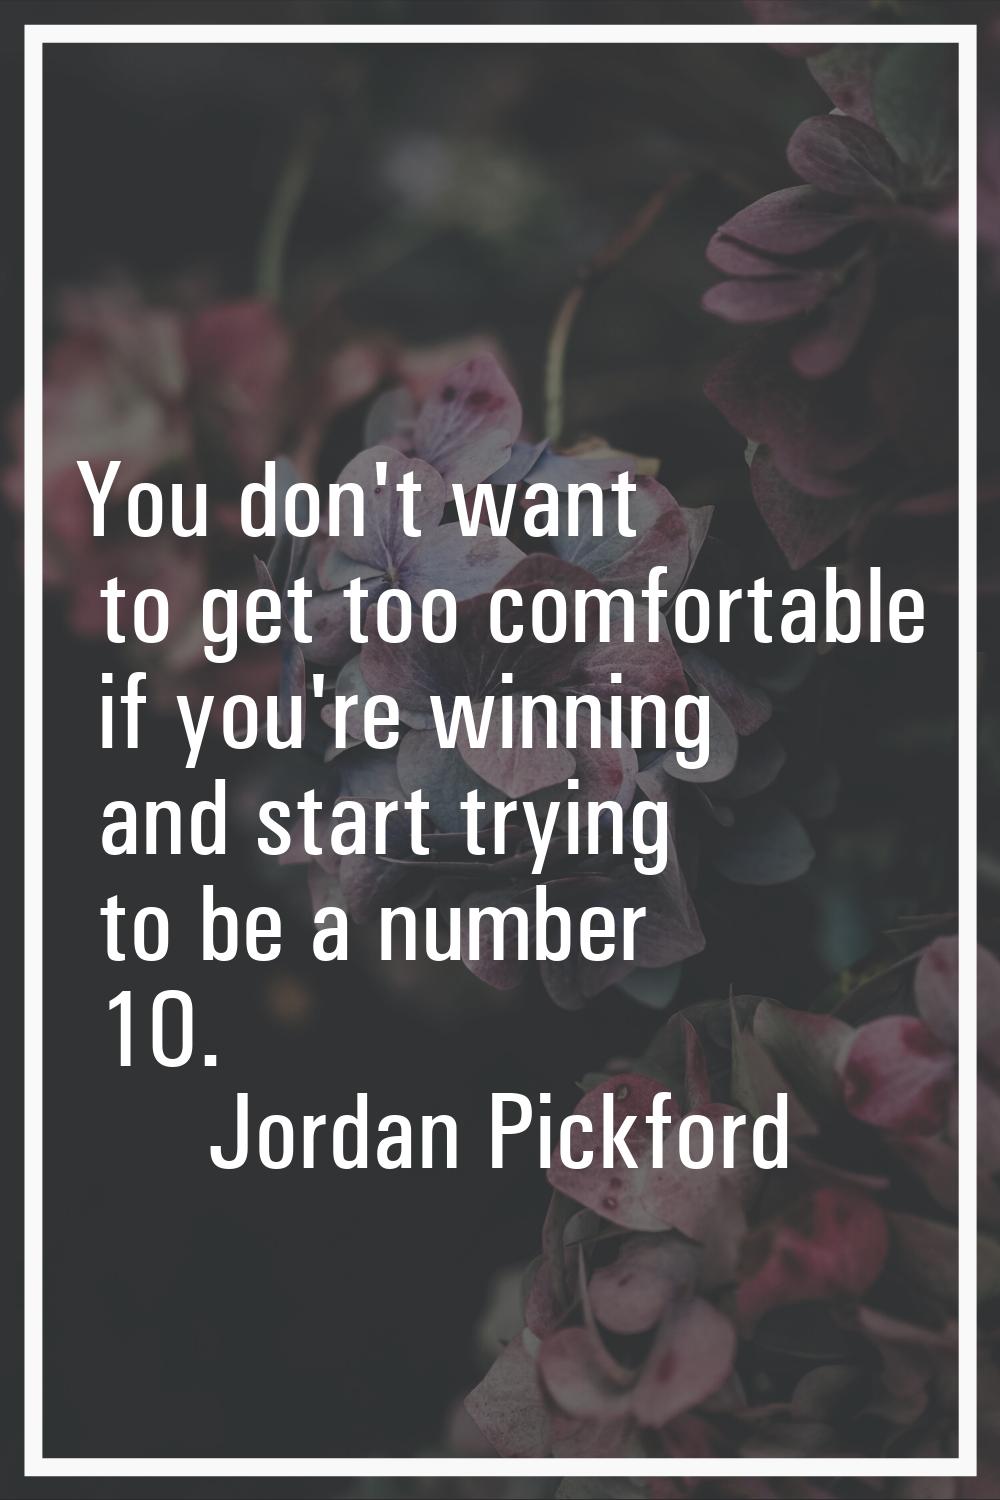 You don't want to get too comfortable if you're winning and start trying to be a number 10.